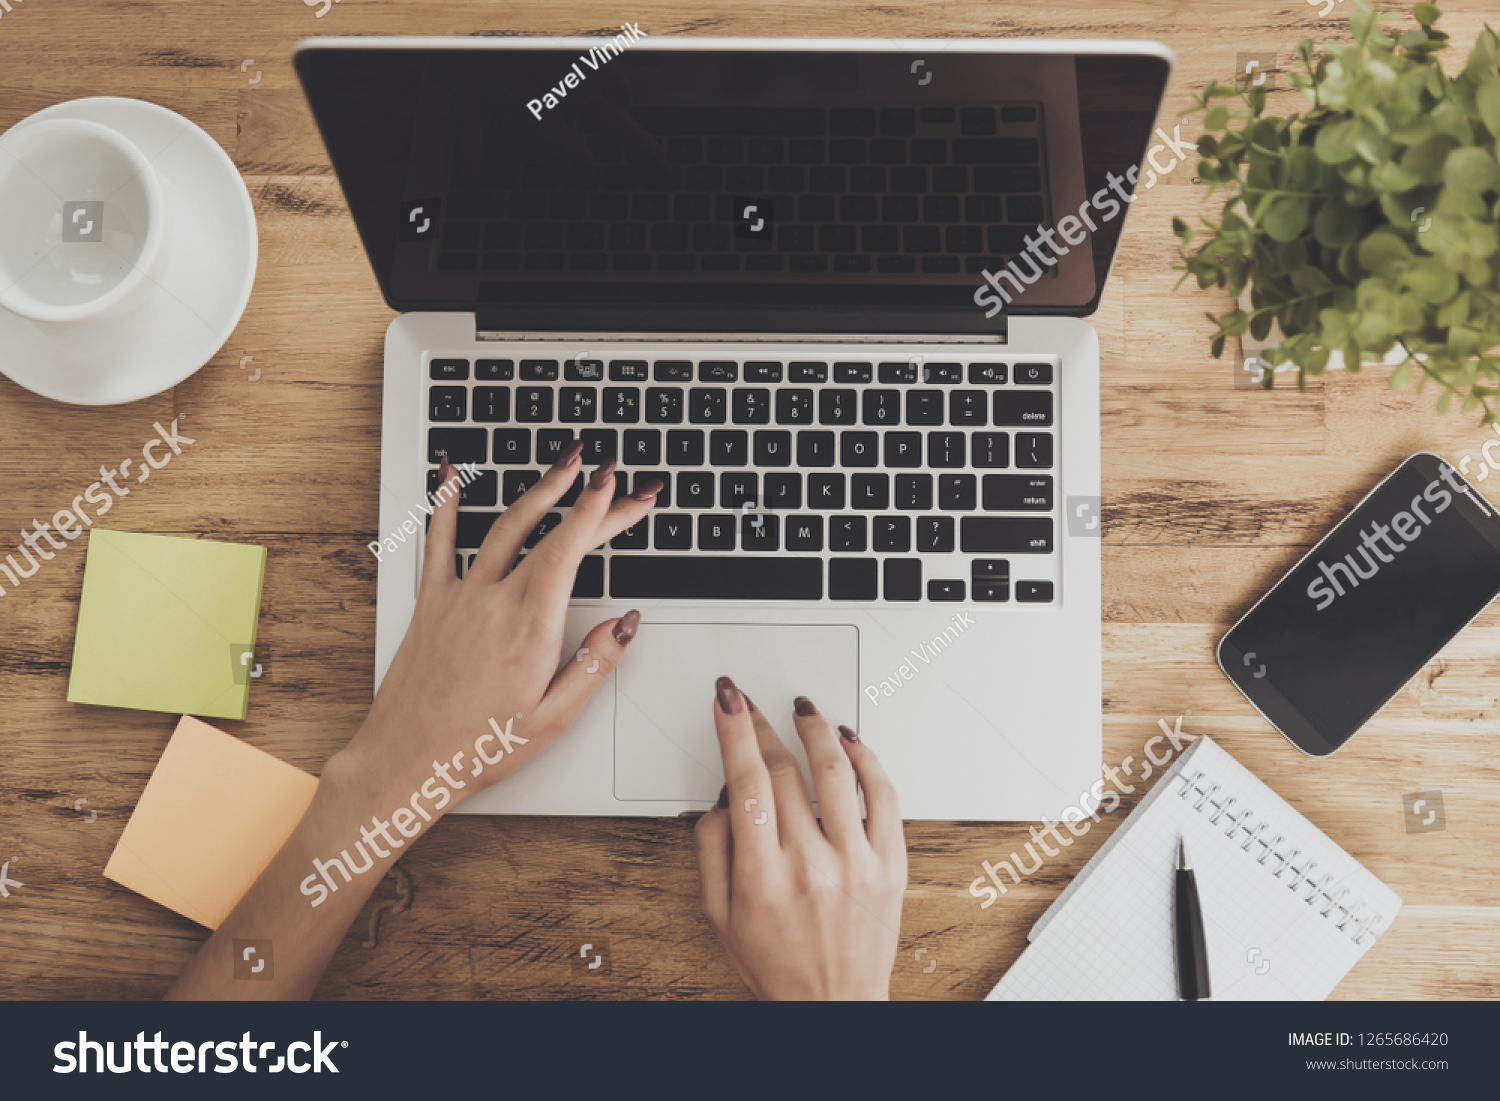 Top view of the working space of a modern business. Female hands are typed on laptop that stands next to cup and notepad on wooden desktop. Digital technologies concept. Creative space. #1265686420